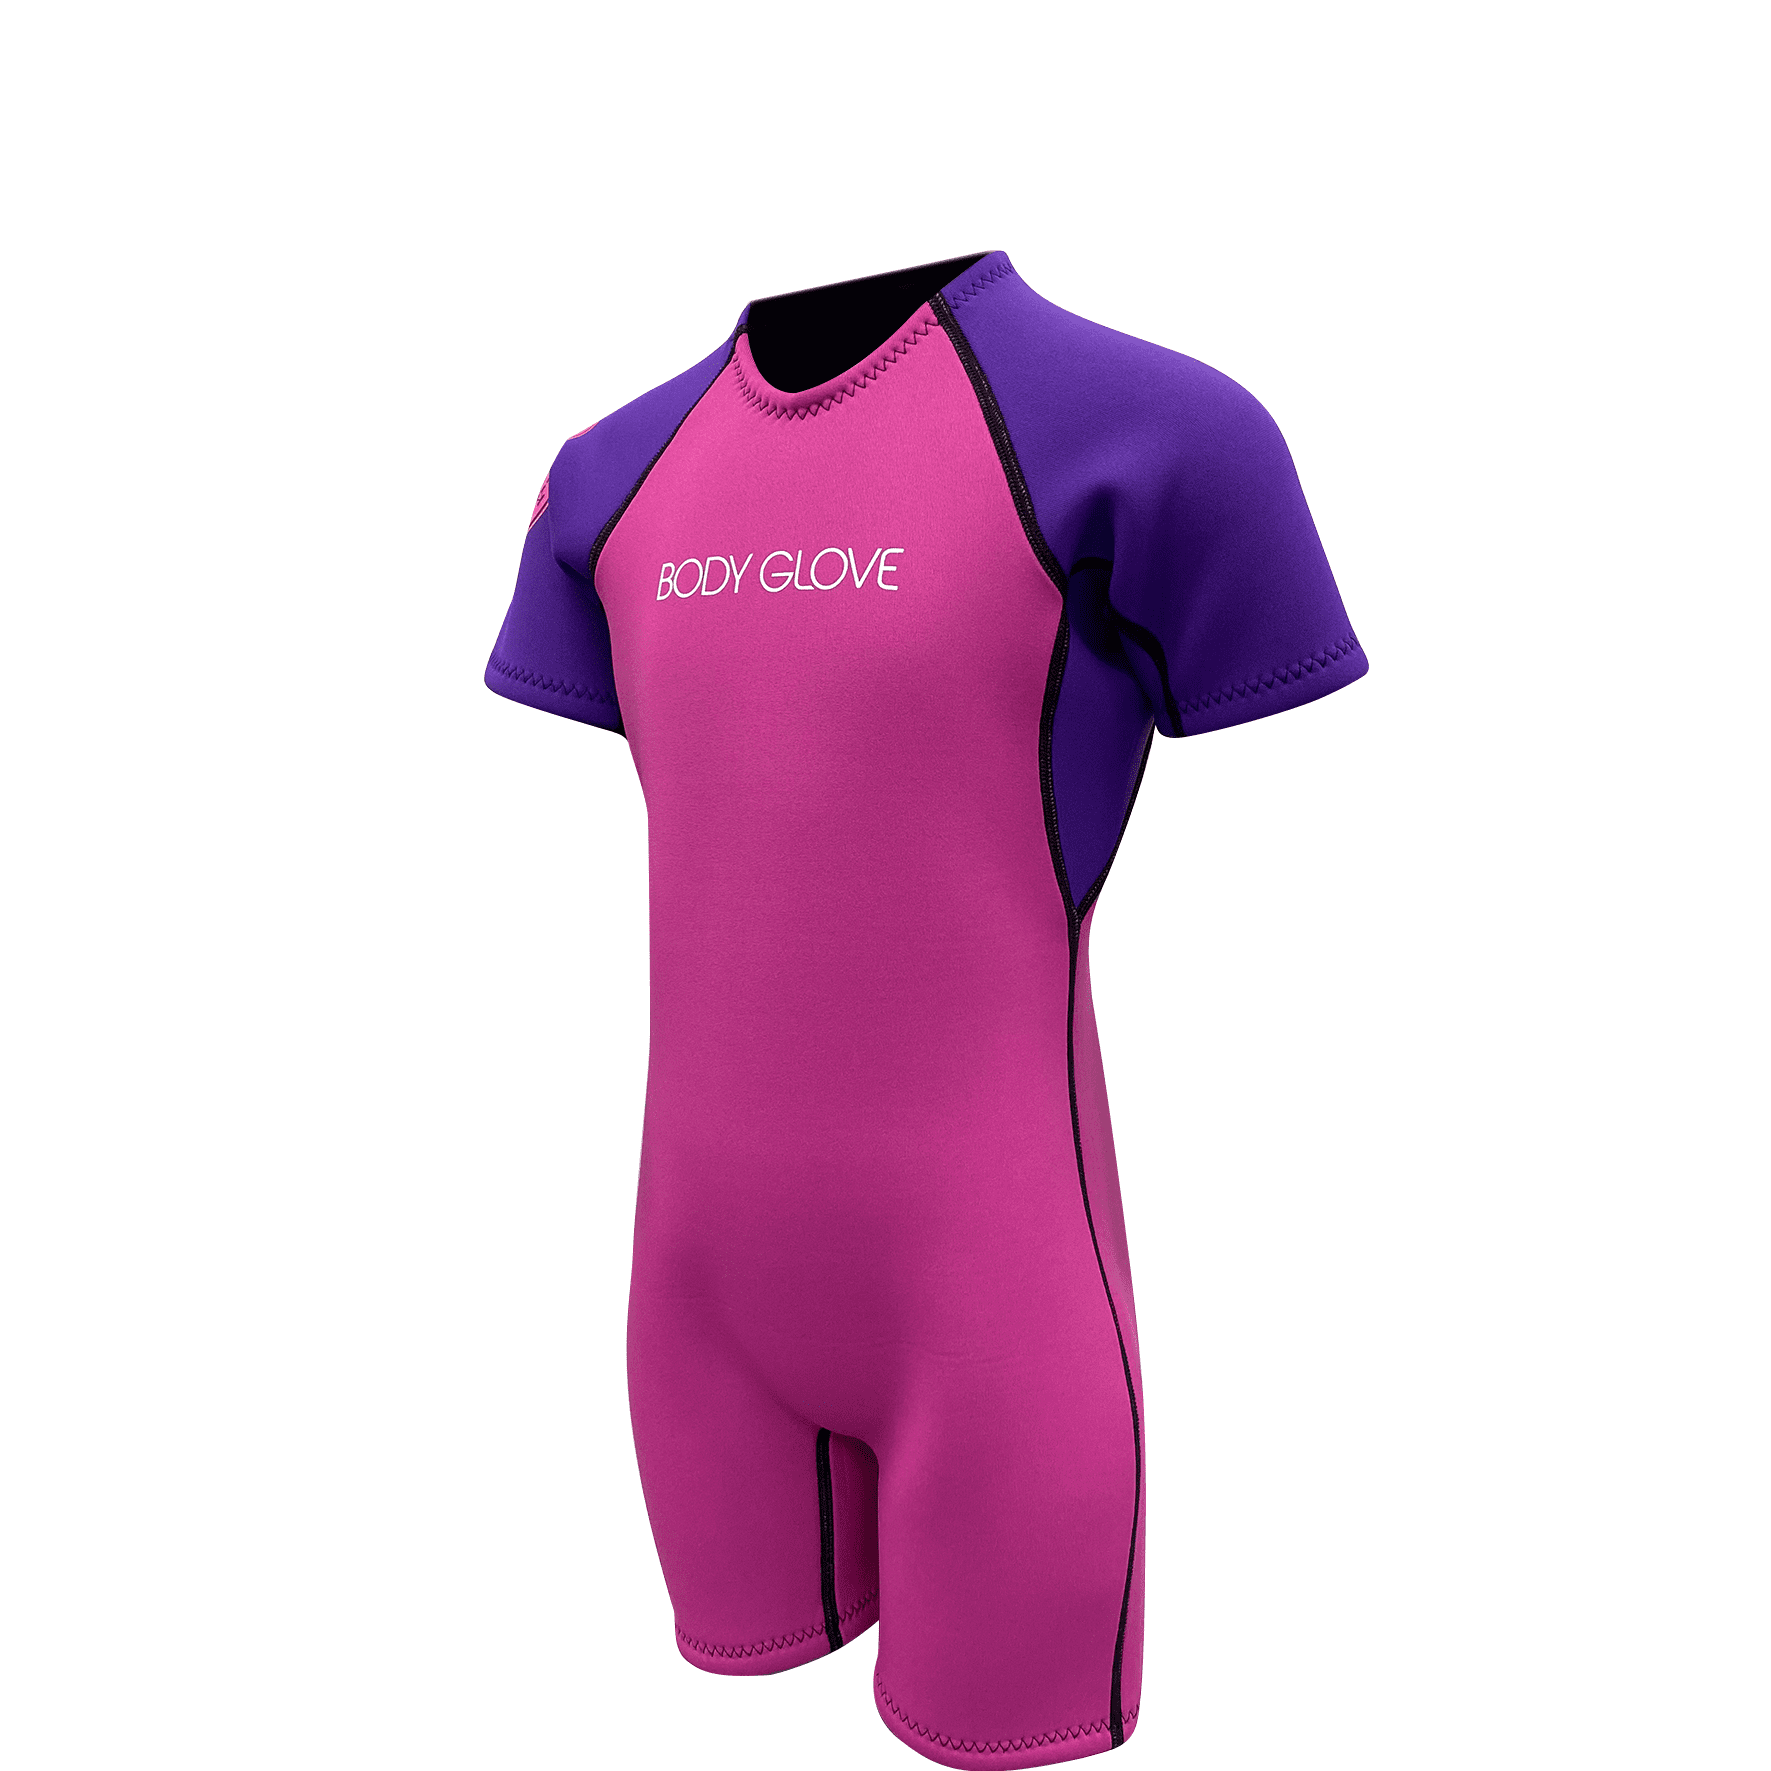 Women’s Size Extra Large Body Glove Springsuit Black and Purple Surfing Wetsuit